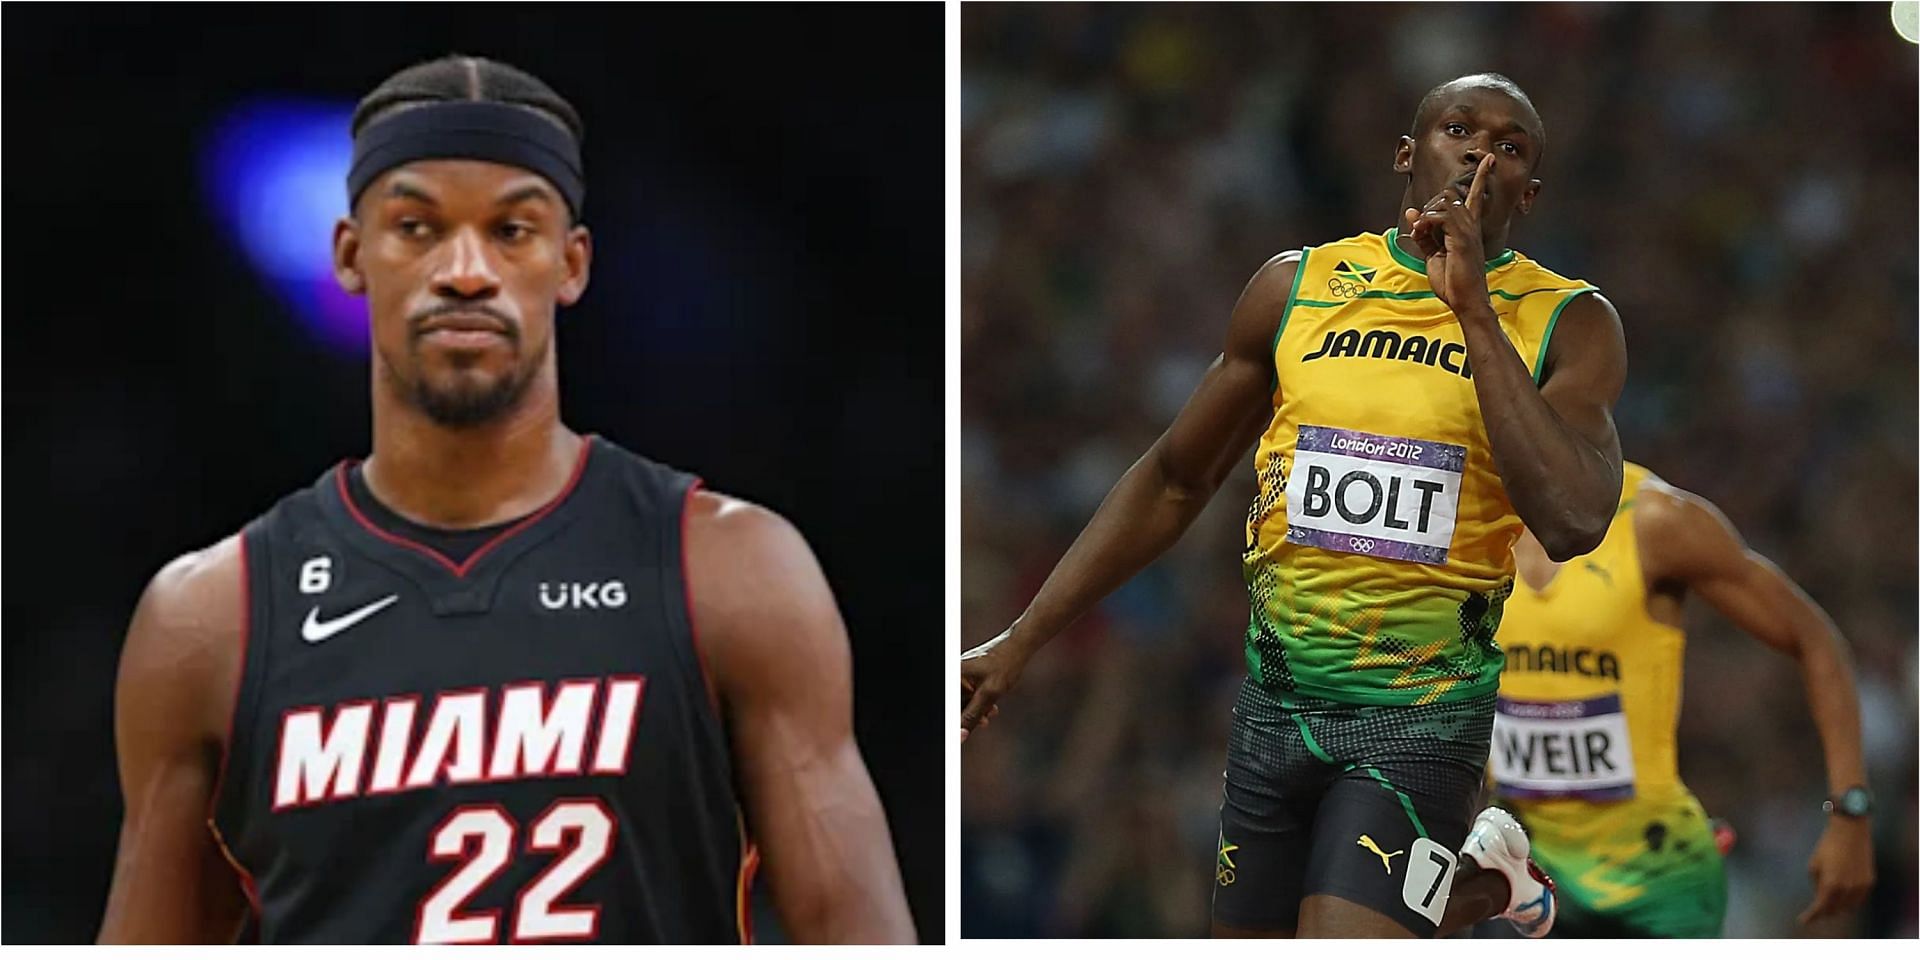 Jimmy Butler&rsquo;s global connections expand as he trounces Usain Bolt